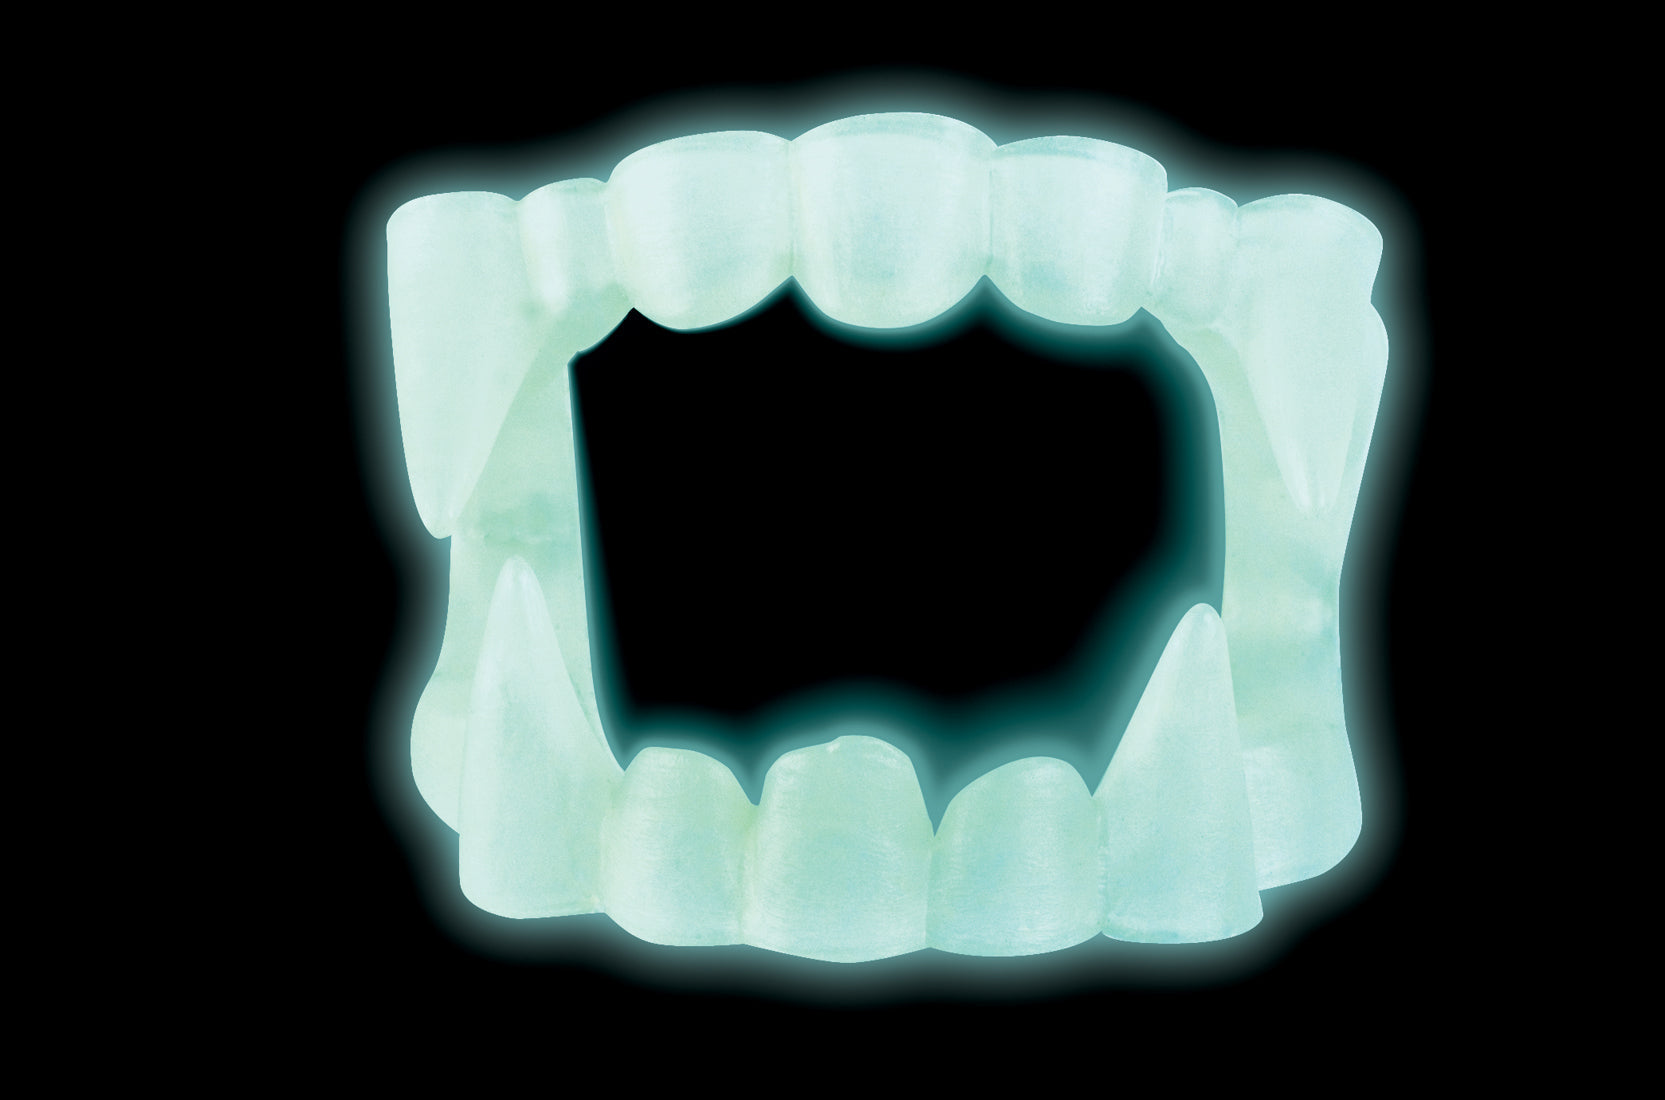 Ultimate Party Super Stores Glow-in-the-Dark Fangs